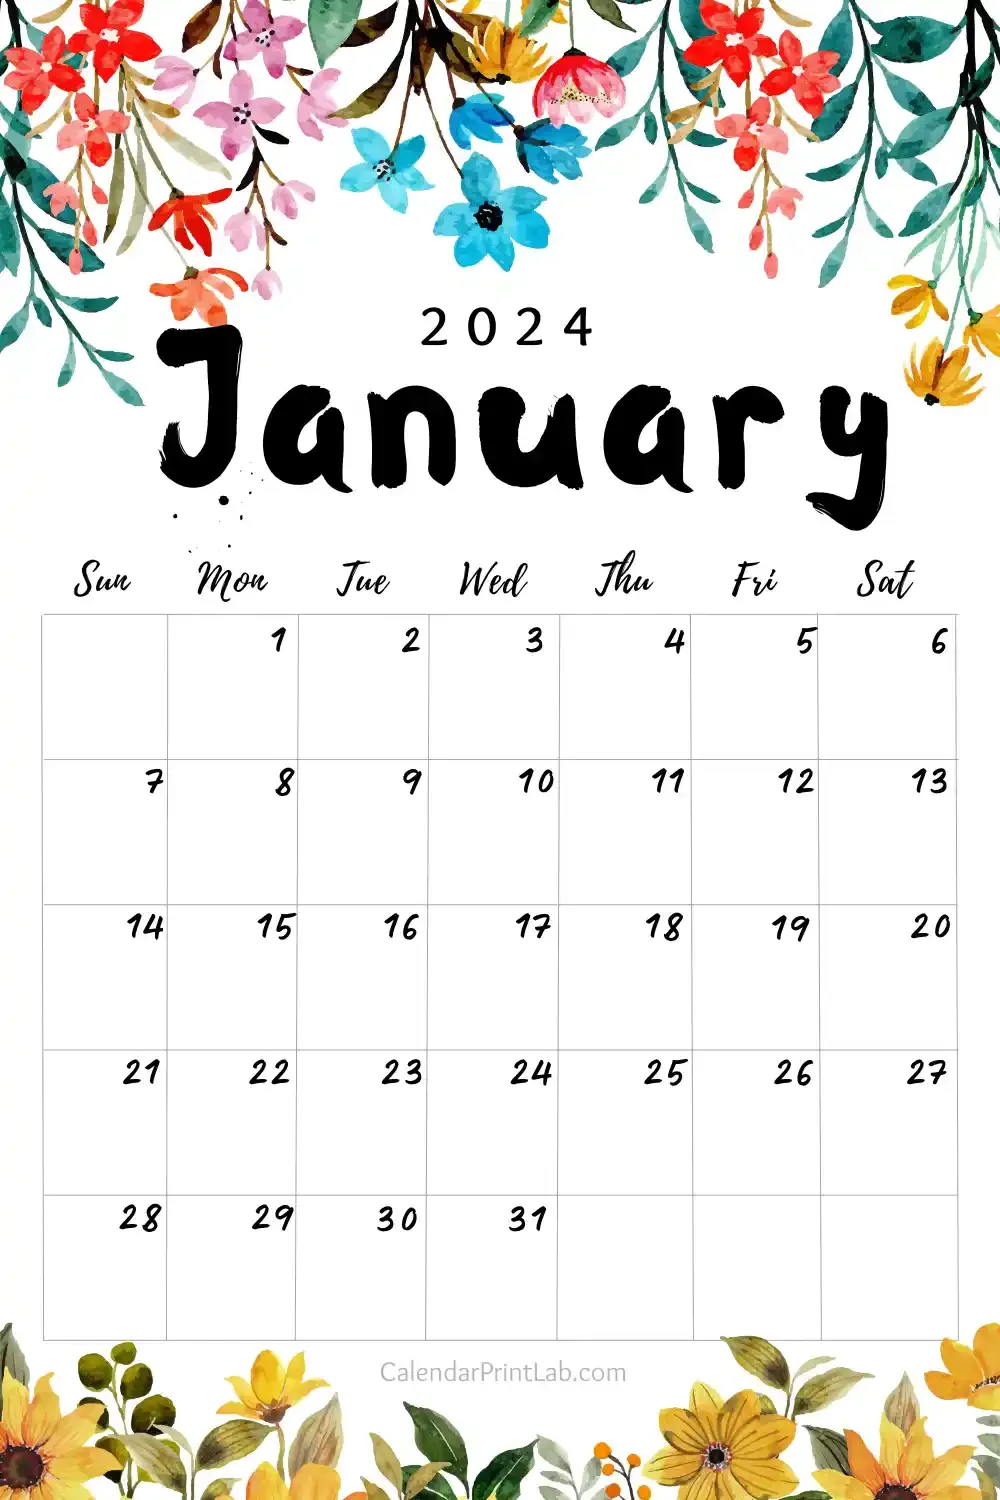 January Planner in Floral Design